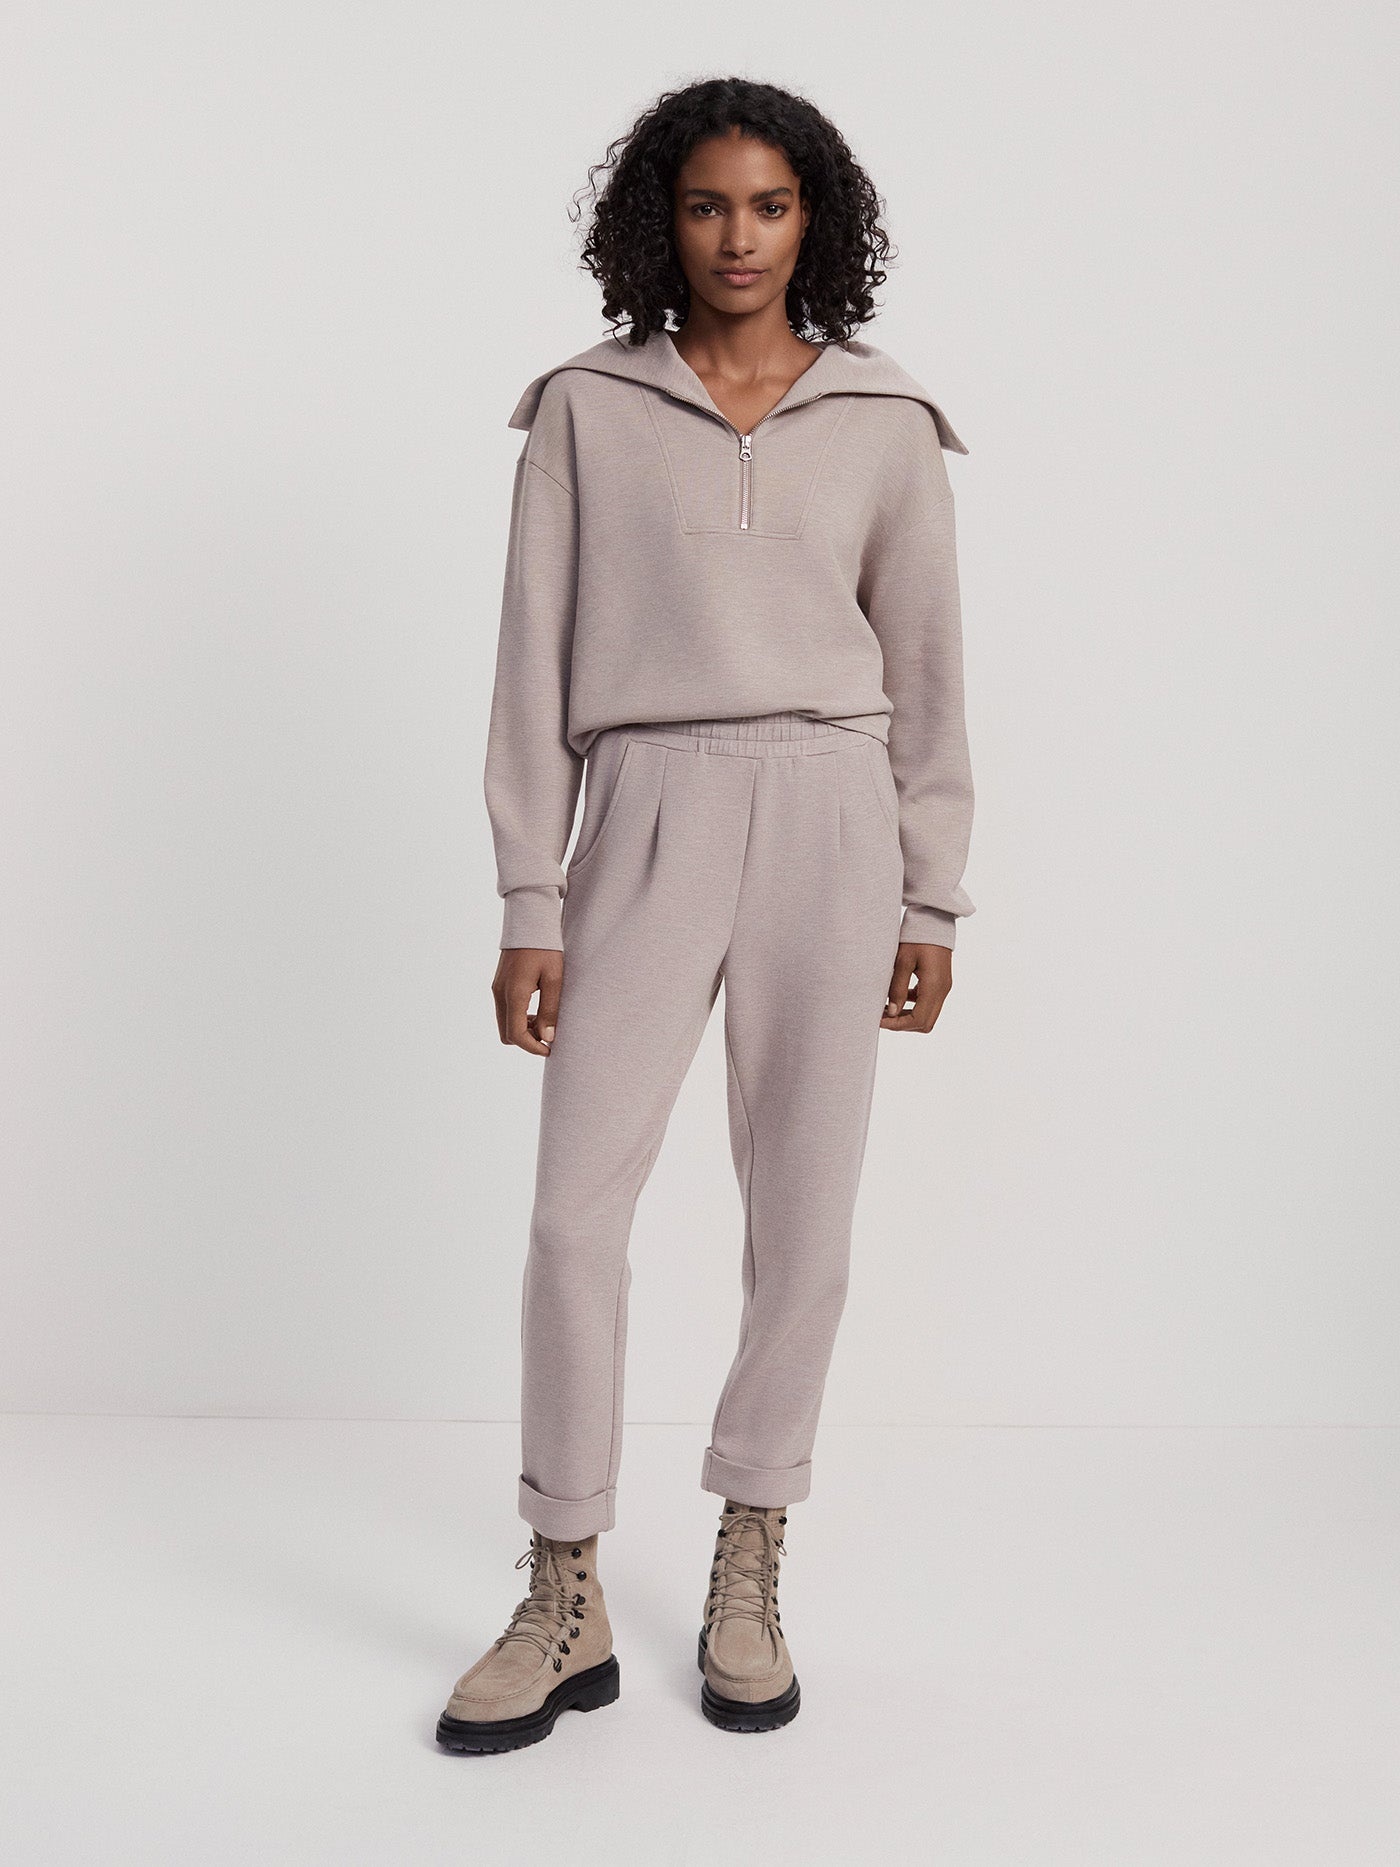 The Rolled Cuff Pant 25 - Taupe Marl - Doodie Stark